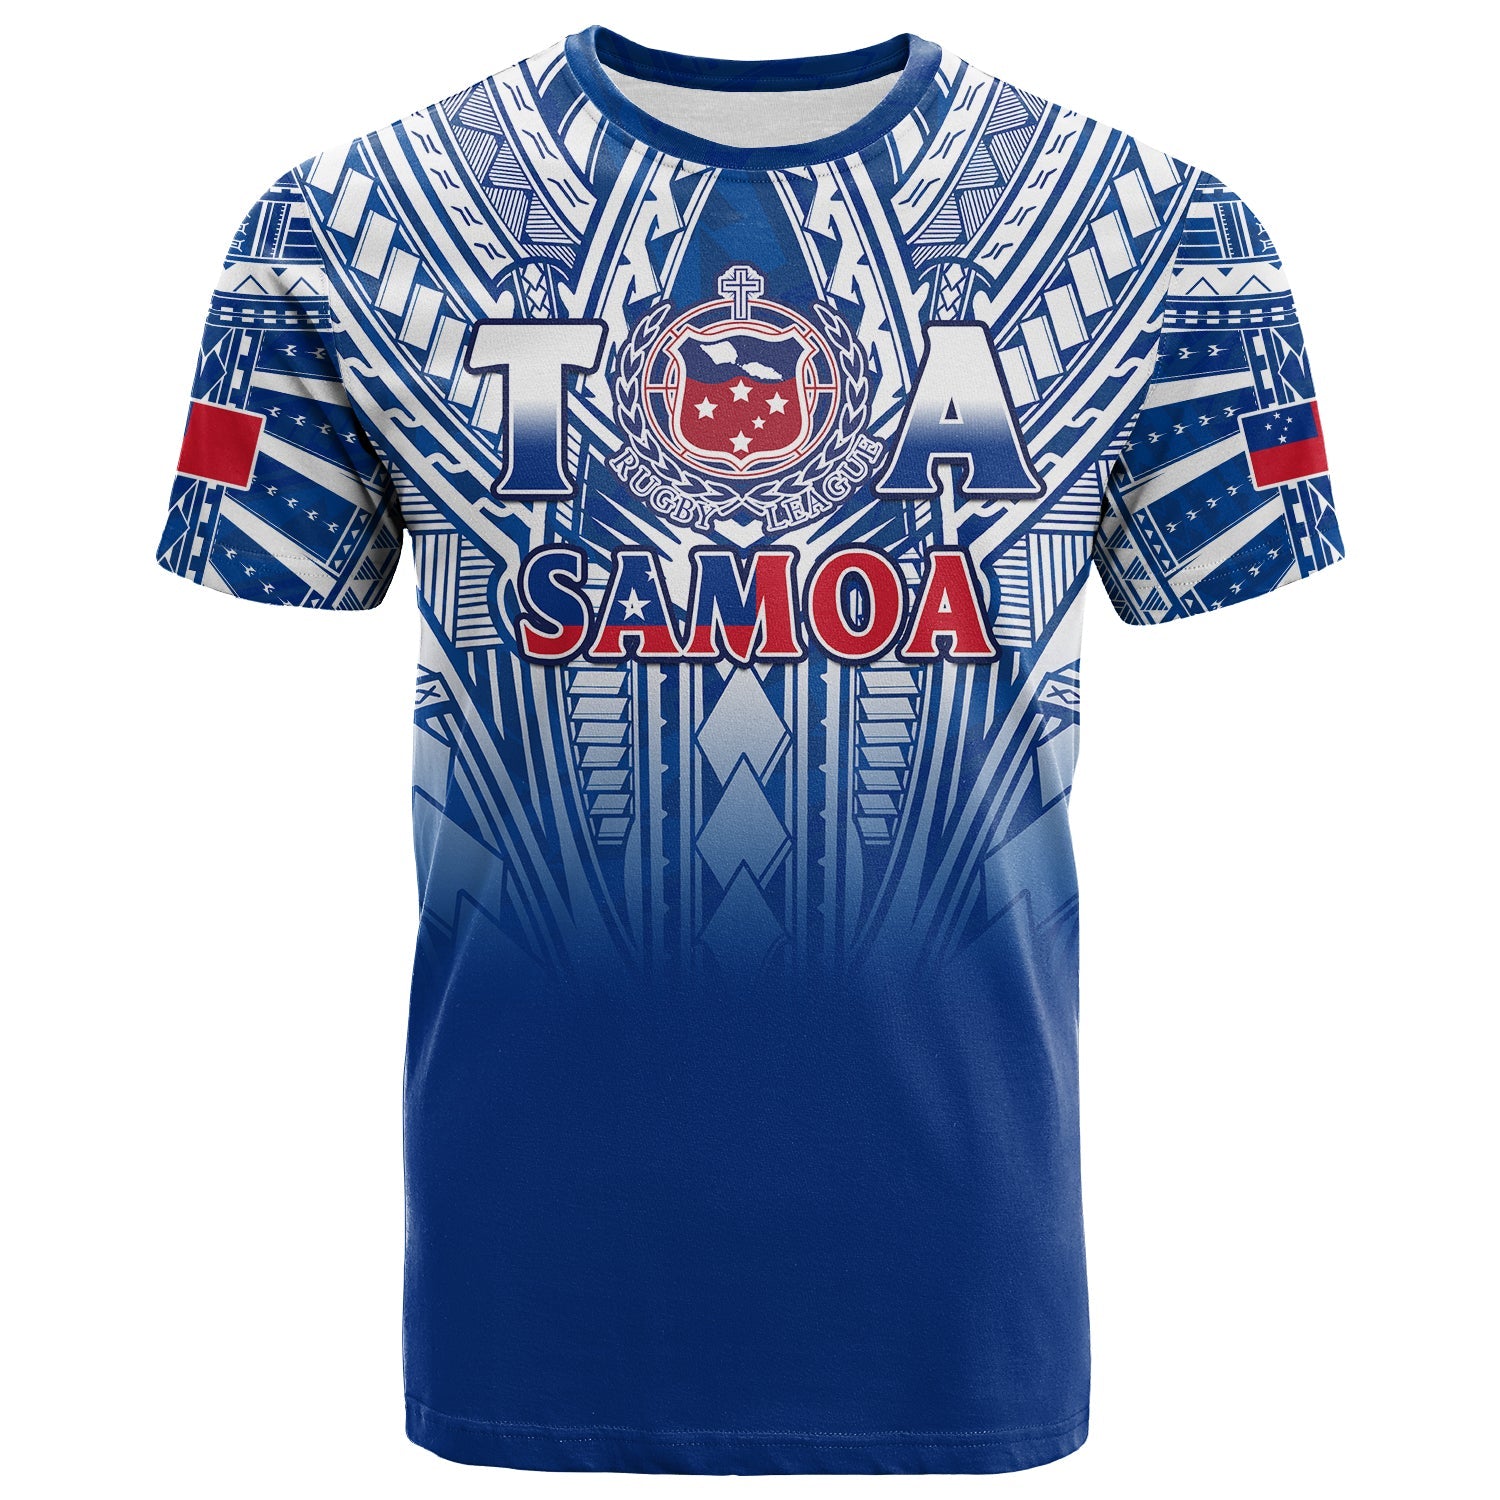 (Custom Text and Number) Samoa Rugby T Shirt Personalise Toa Samoa Polynesian Pacific Navy Version LT14 Blue - Polynesian Pride